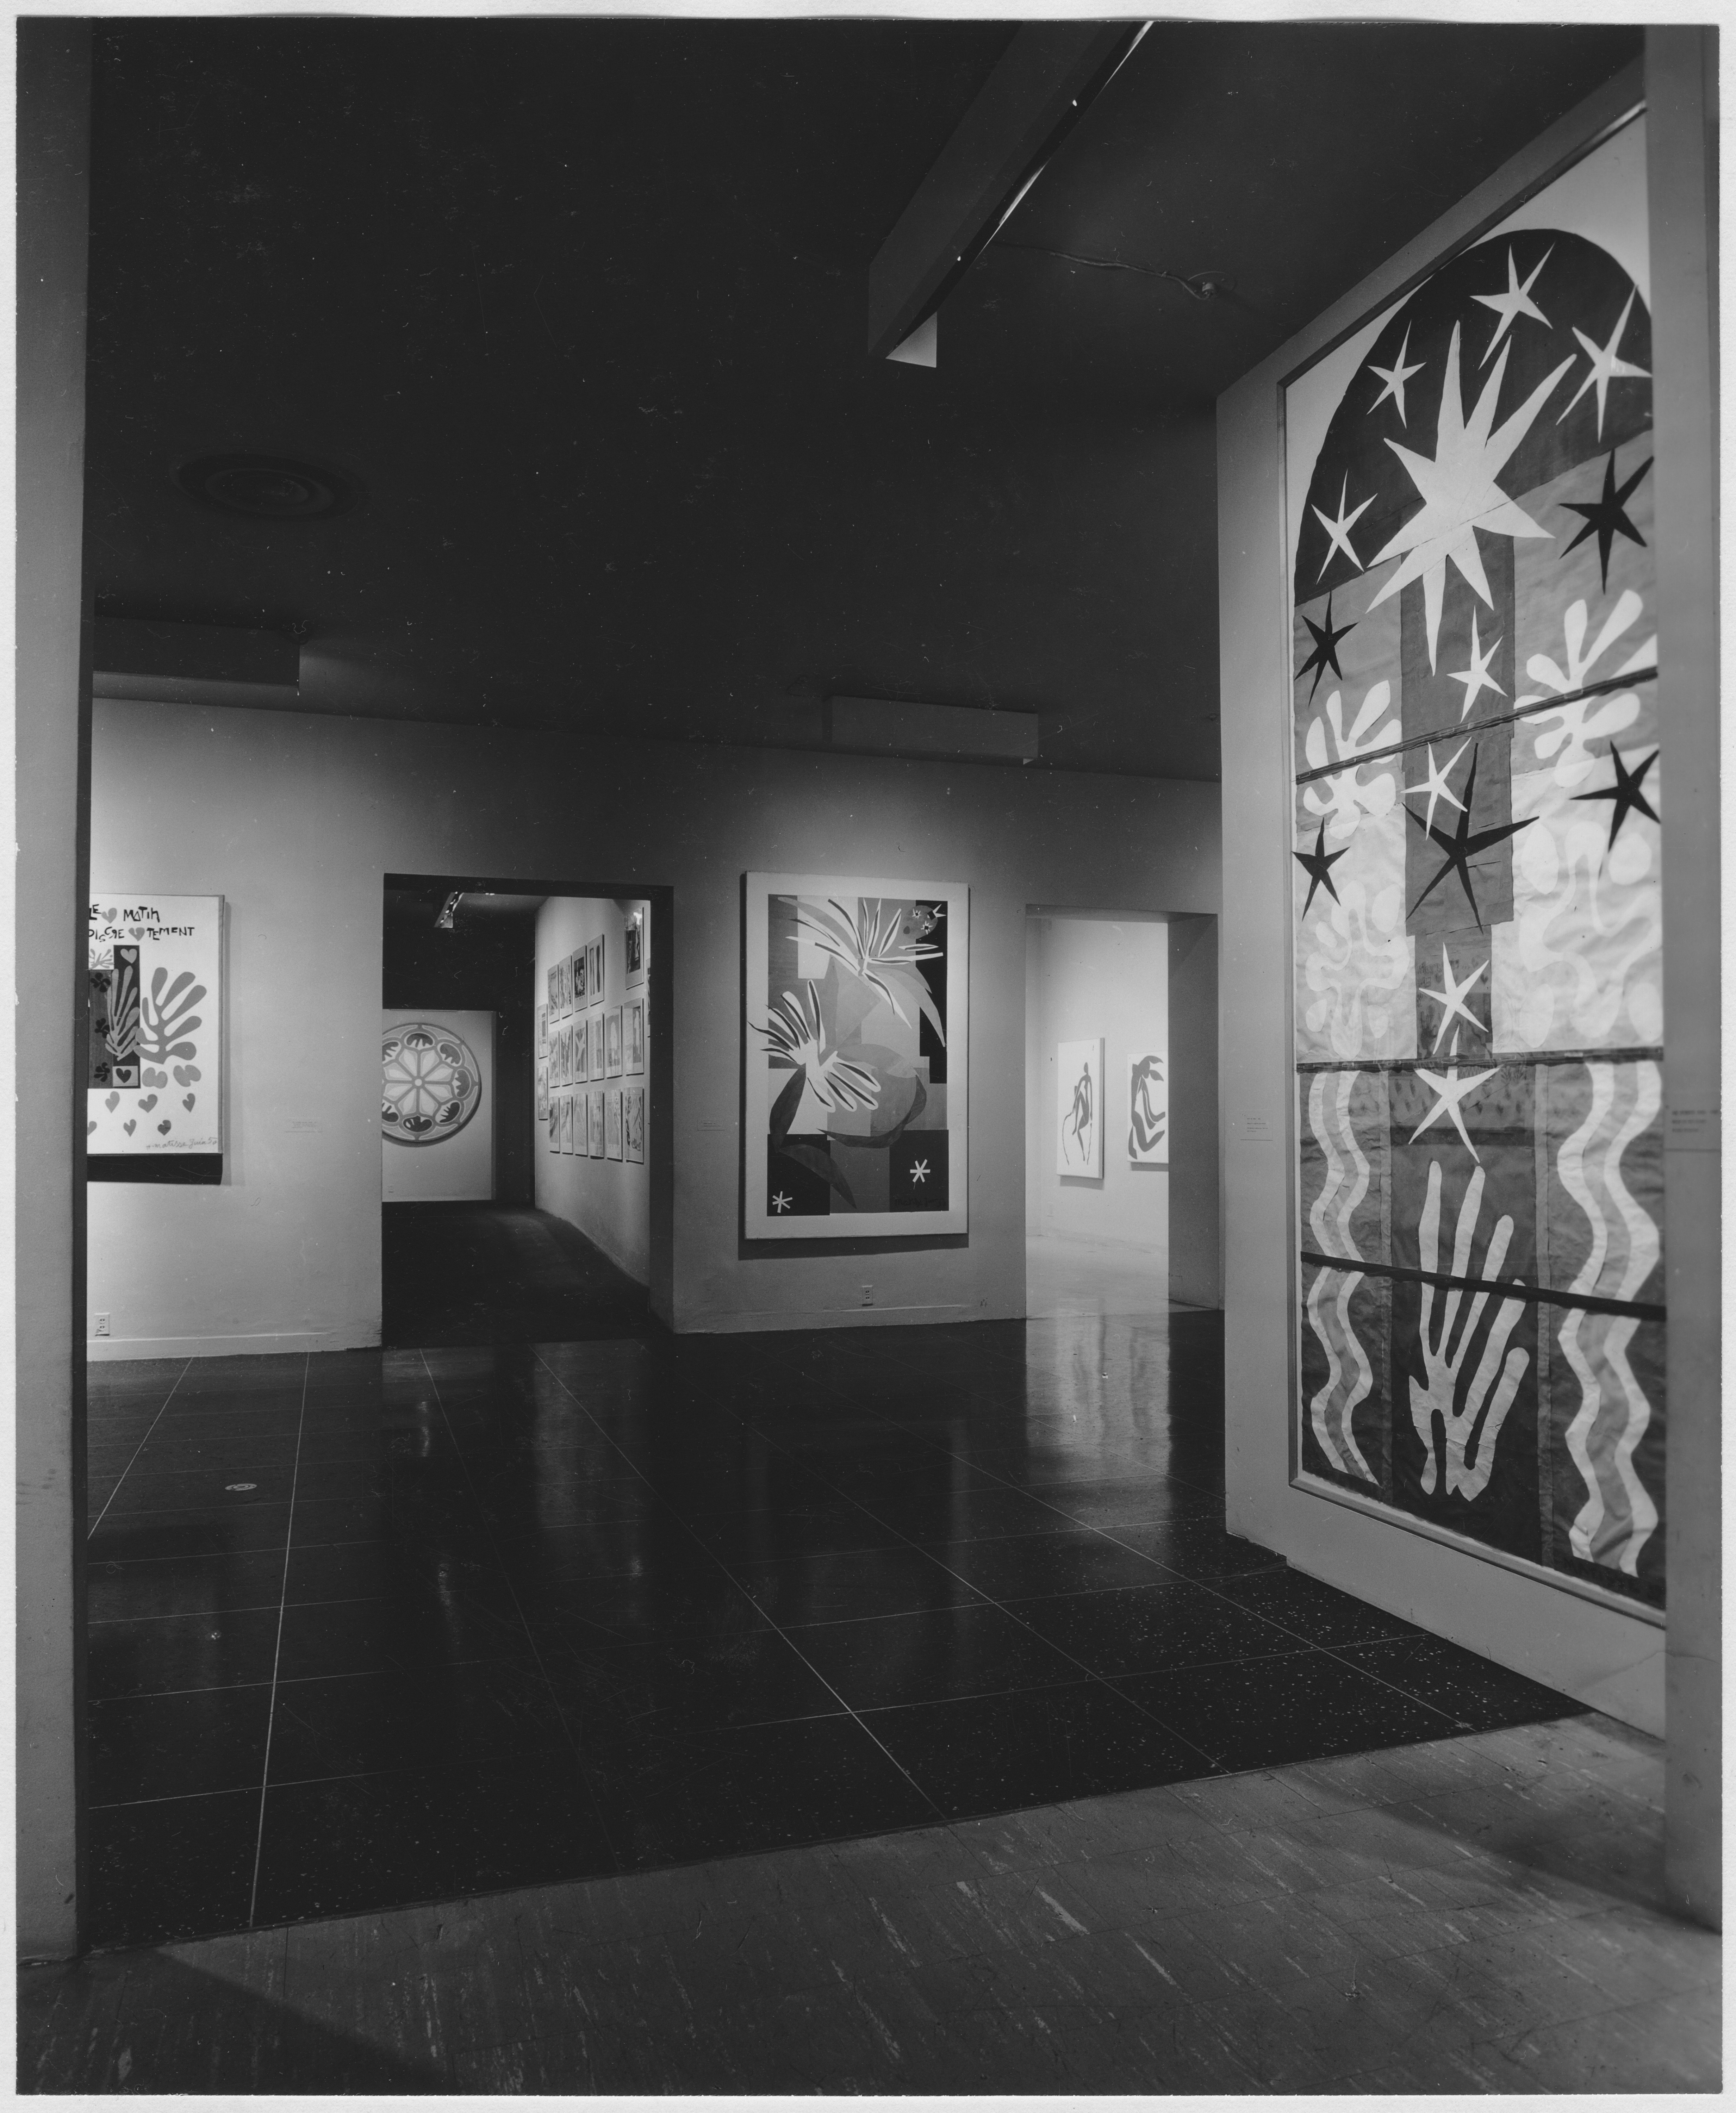 "The Last Works of Matisse: Large Cut Gouaches" at the Museum of Modern Art in 1961. Courtesy of the Museum of Modern Art Archives, New York.